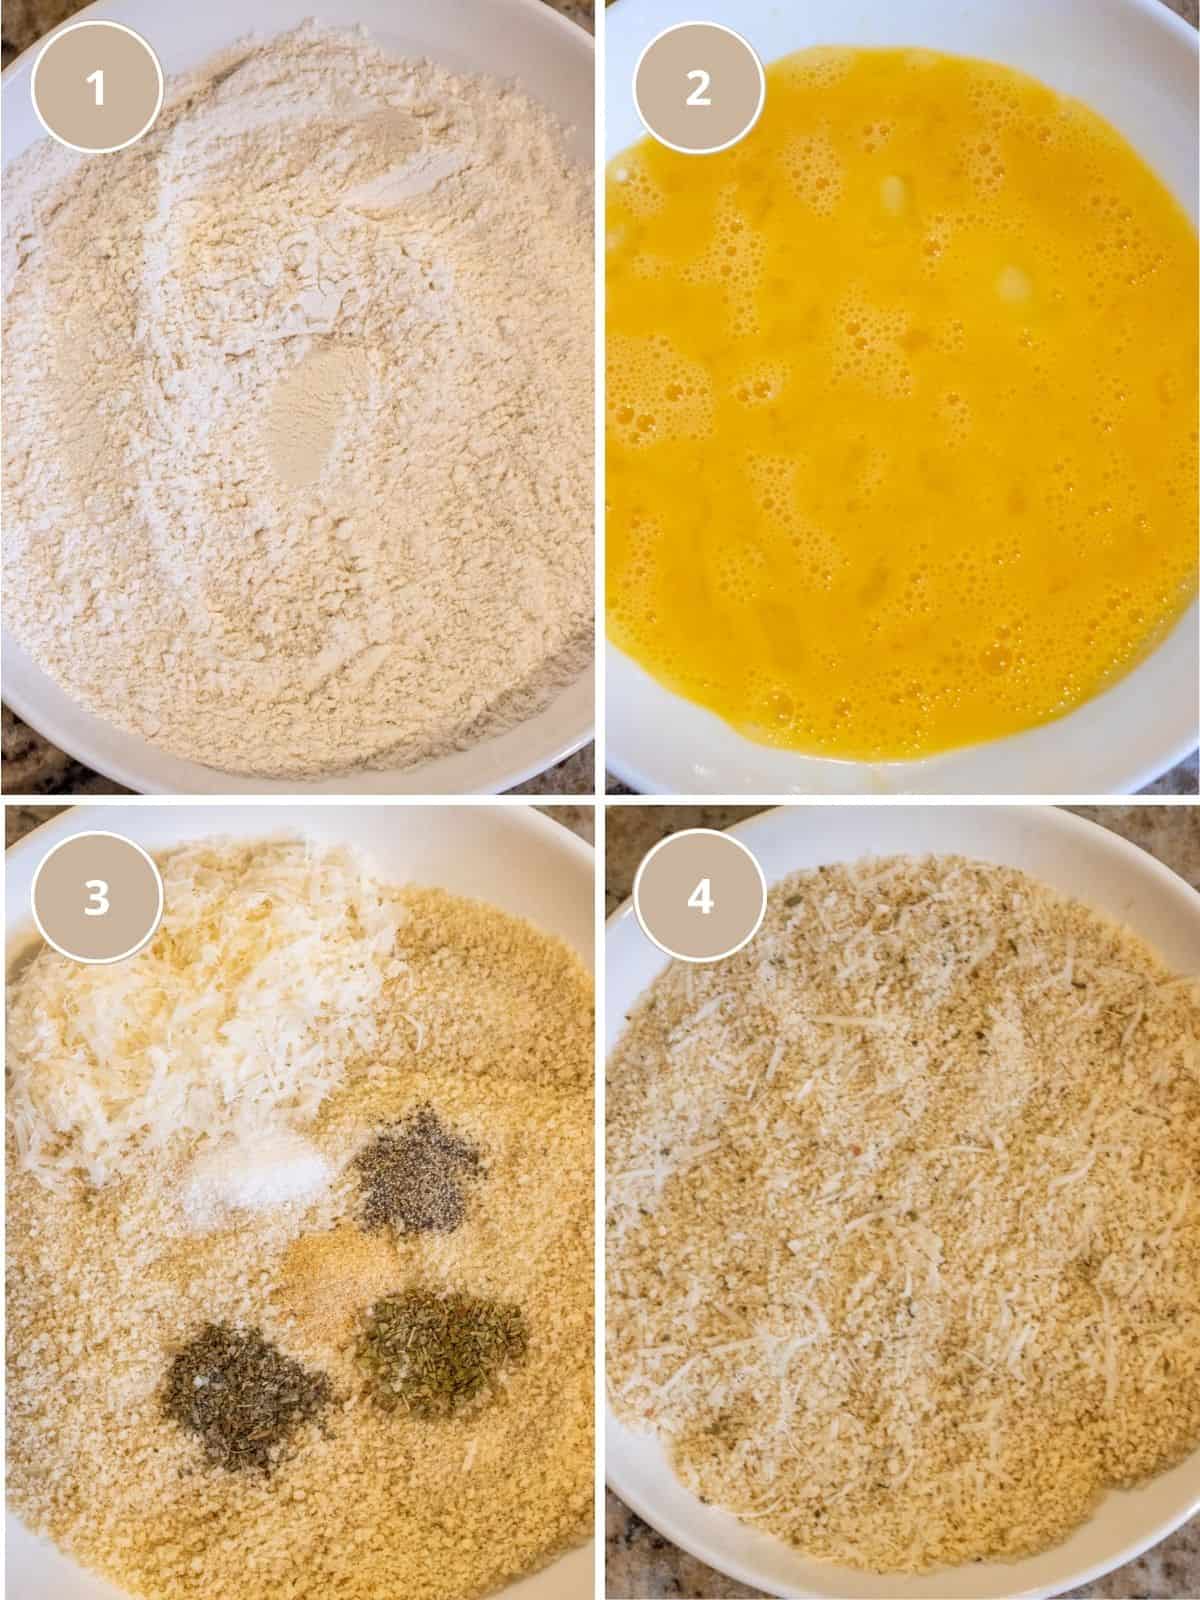 Four part grid showing the flour, egg wash, and seasoned panko bread crumbs for breading zucchini chips.